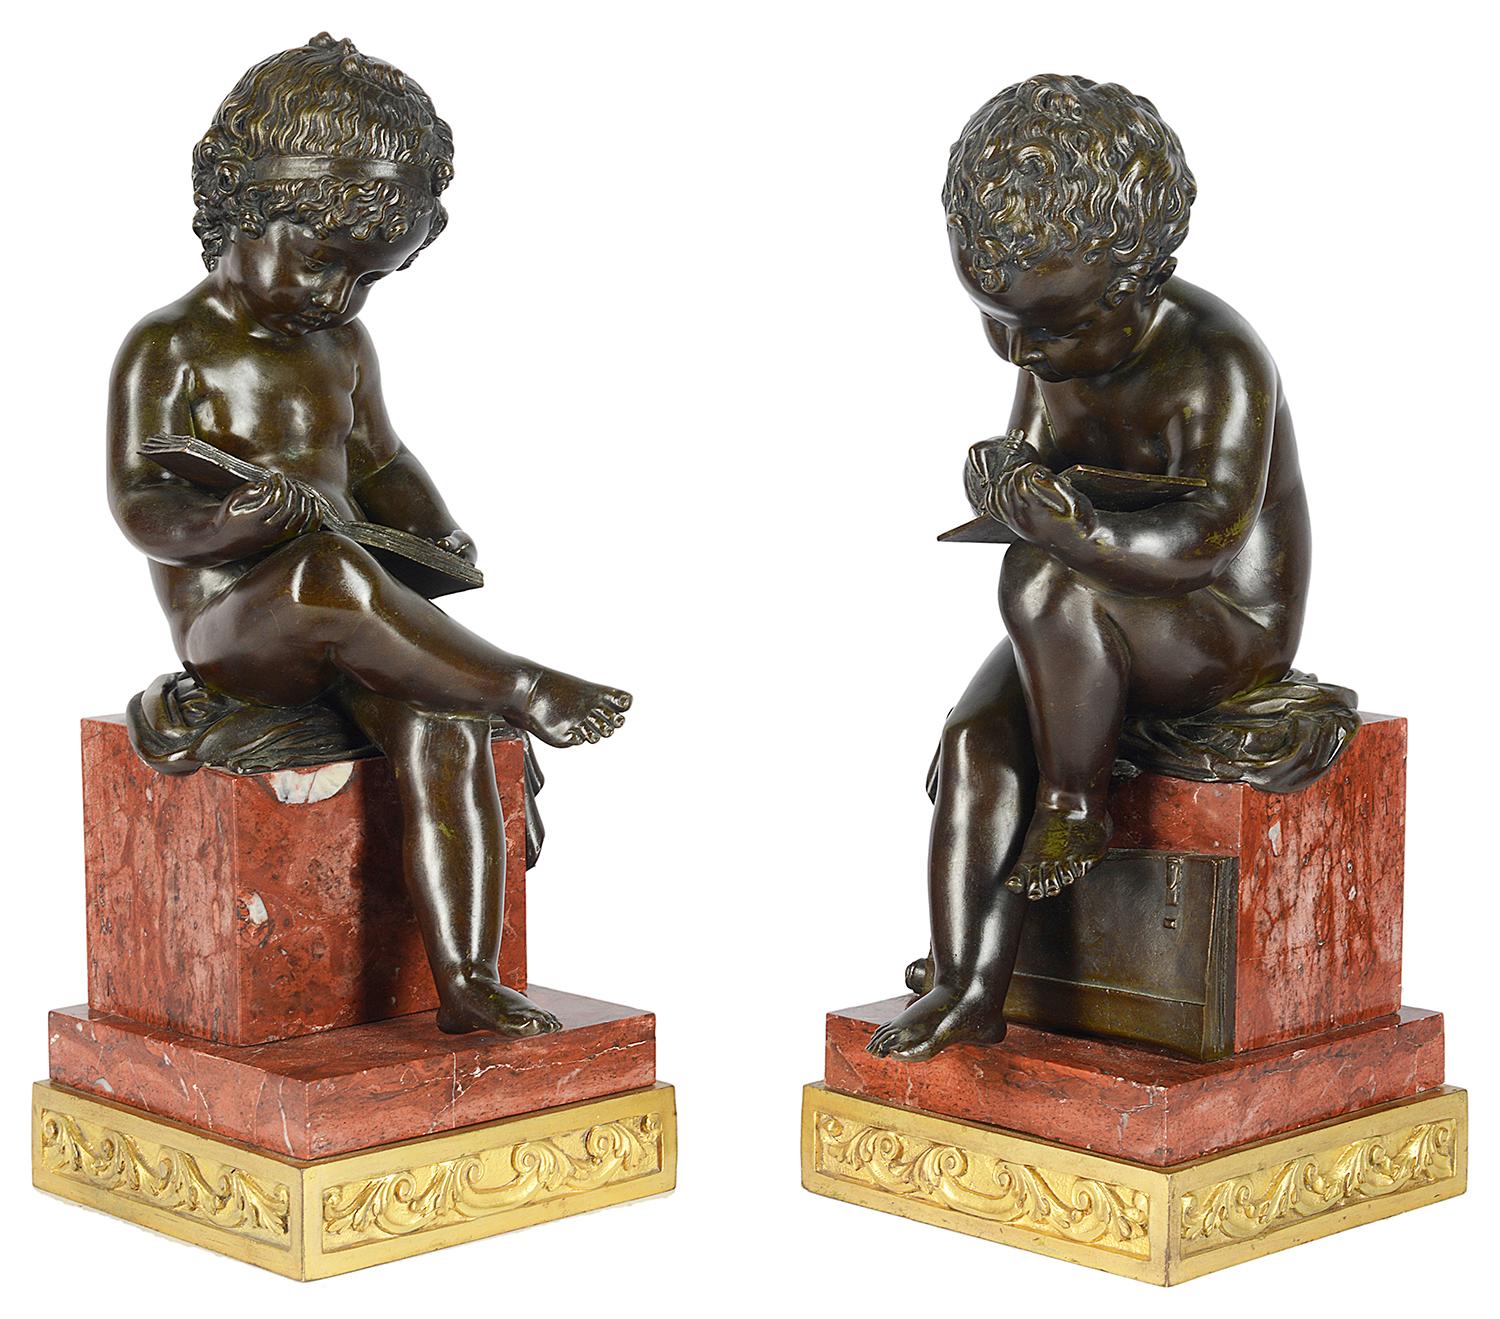 A fine quality pair of 19th century classical bronze seated putti, reading and writing, mounted on square rouge marble plinths and engraved gilded ormolu bases.